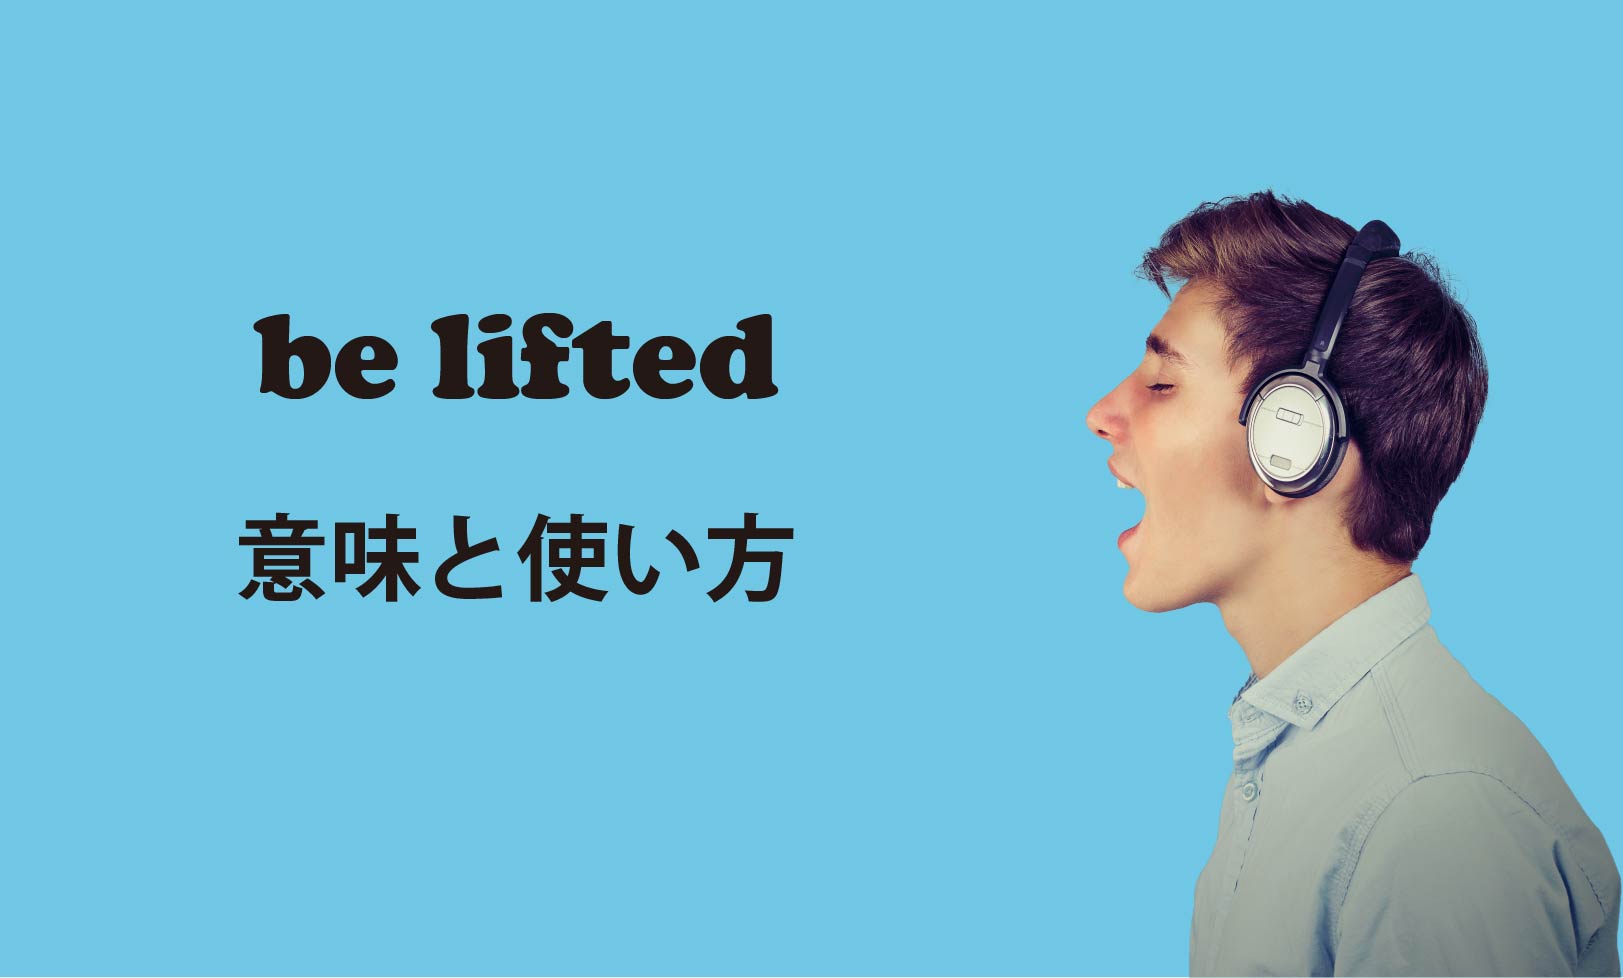 be lifted ブログ　表紙